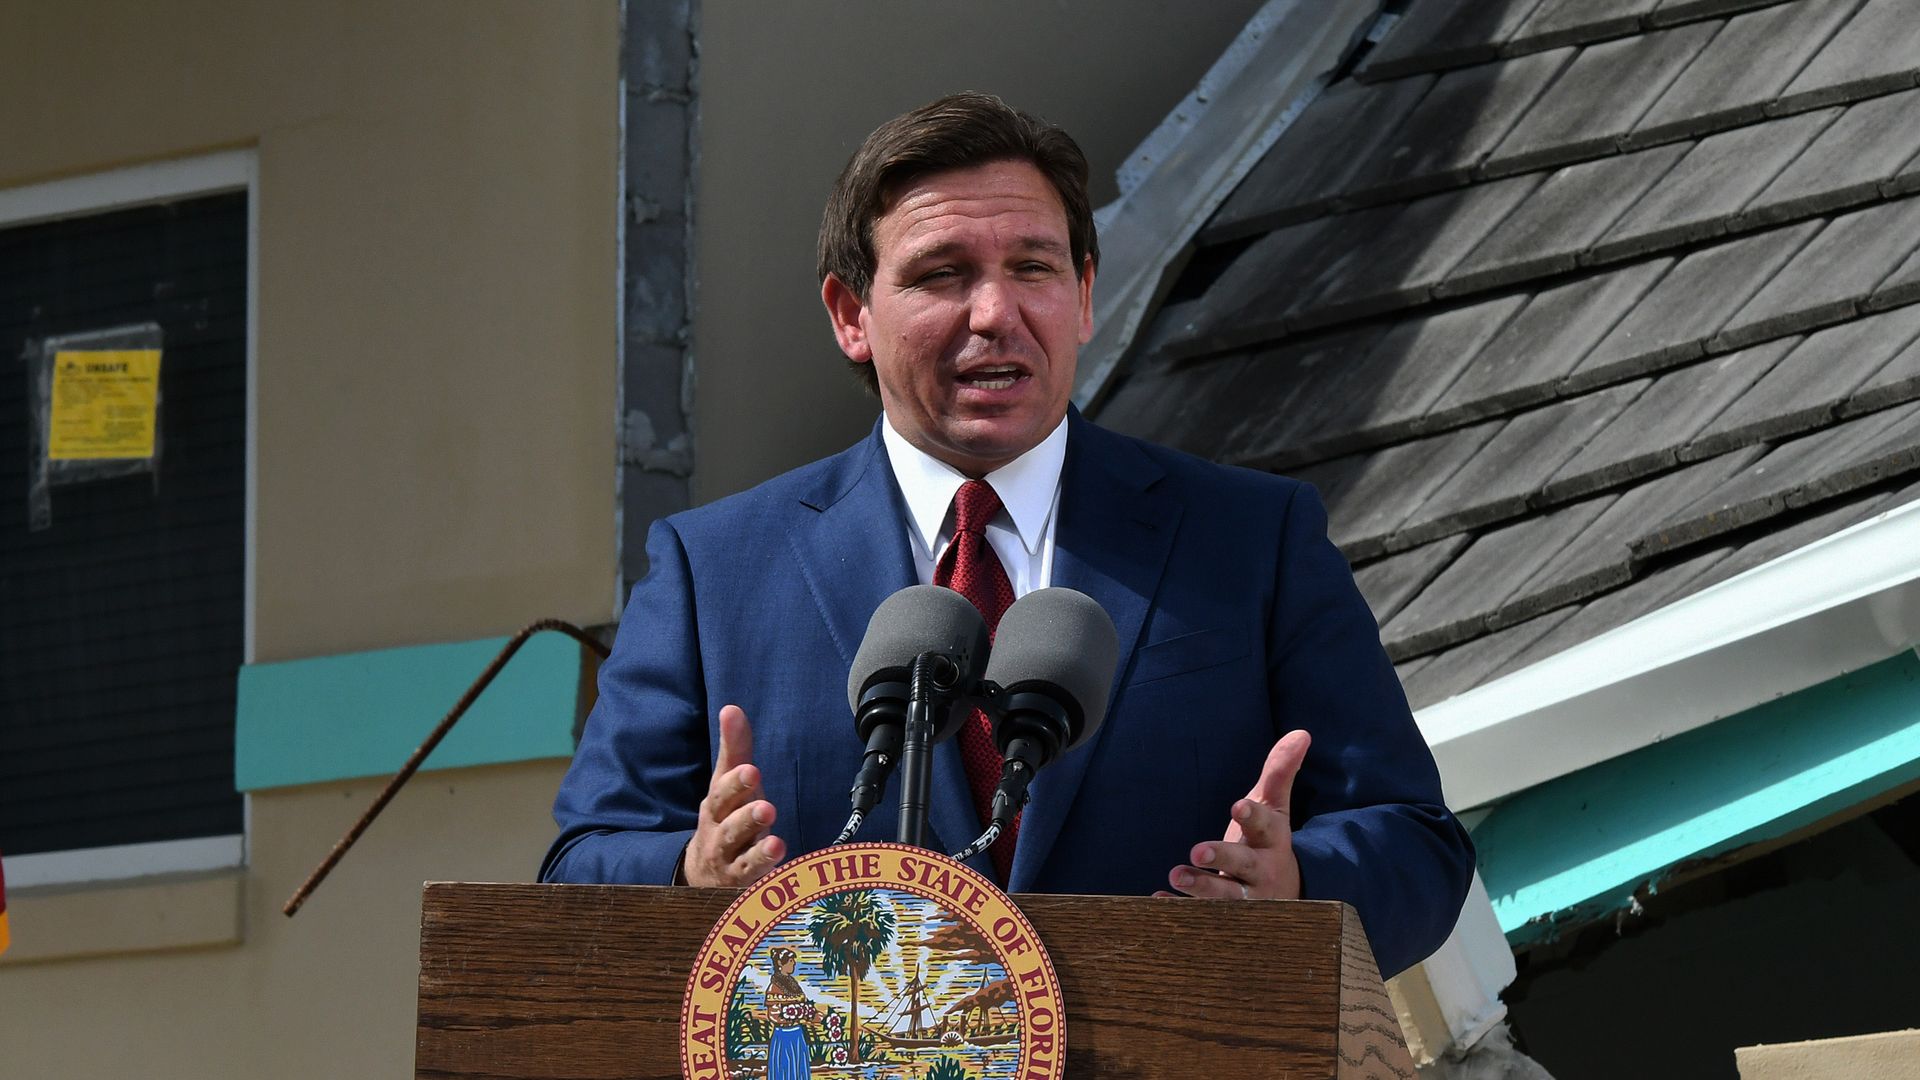 Florida Gov. Ron DeSantis speaks at a press conference to announce the award of $100 million for beach recovery following Hurricanes Ian and Nicole in Daytona Beach Shores in Florida